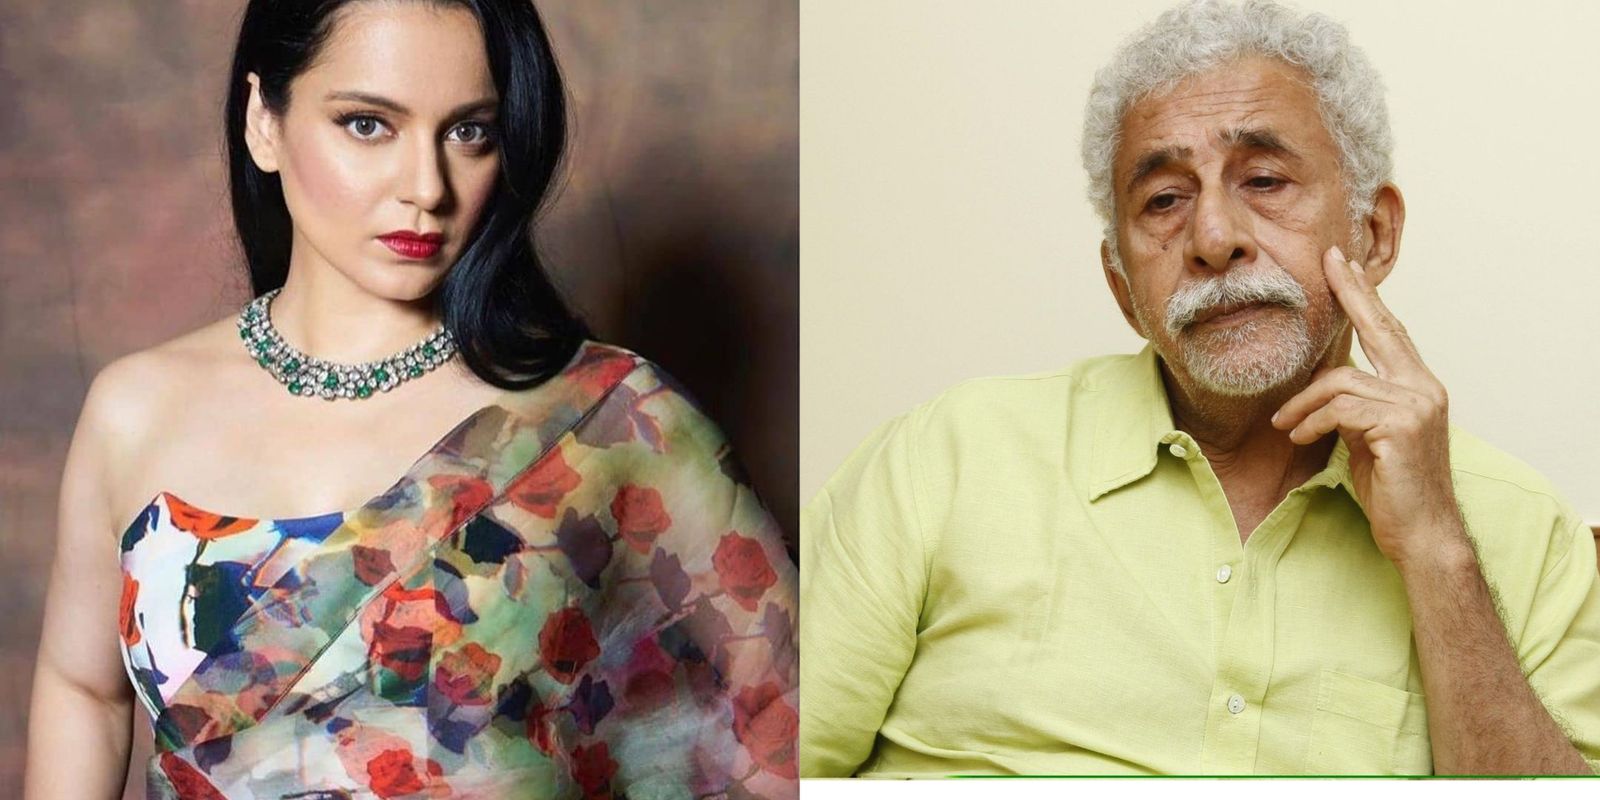 Kangana Ranaut On Naseeruddin Shah's 'Half-Educated Starlet' Remark: Would You Say This If I Were Anil Kapoor’s Daughter?